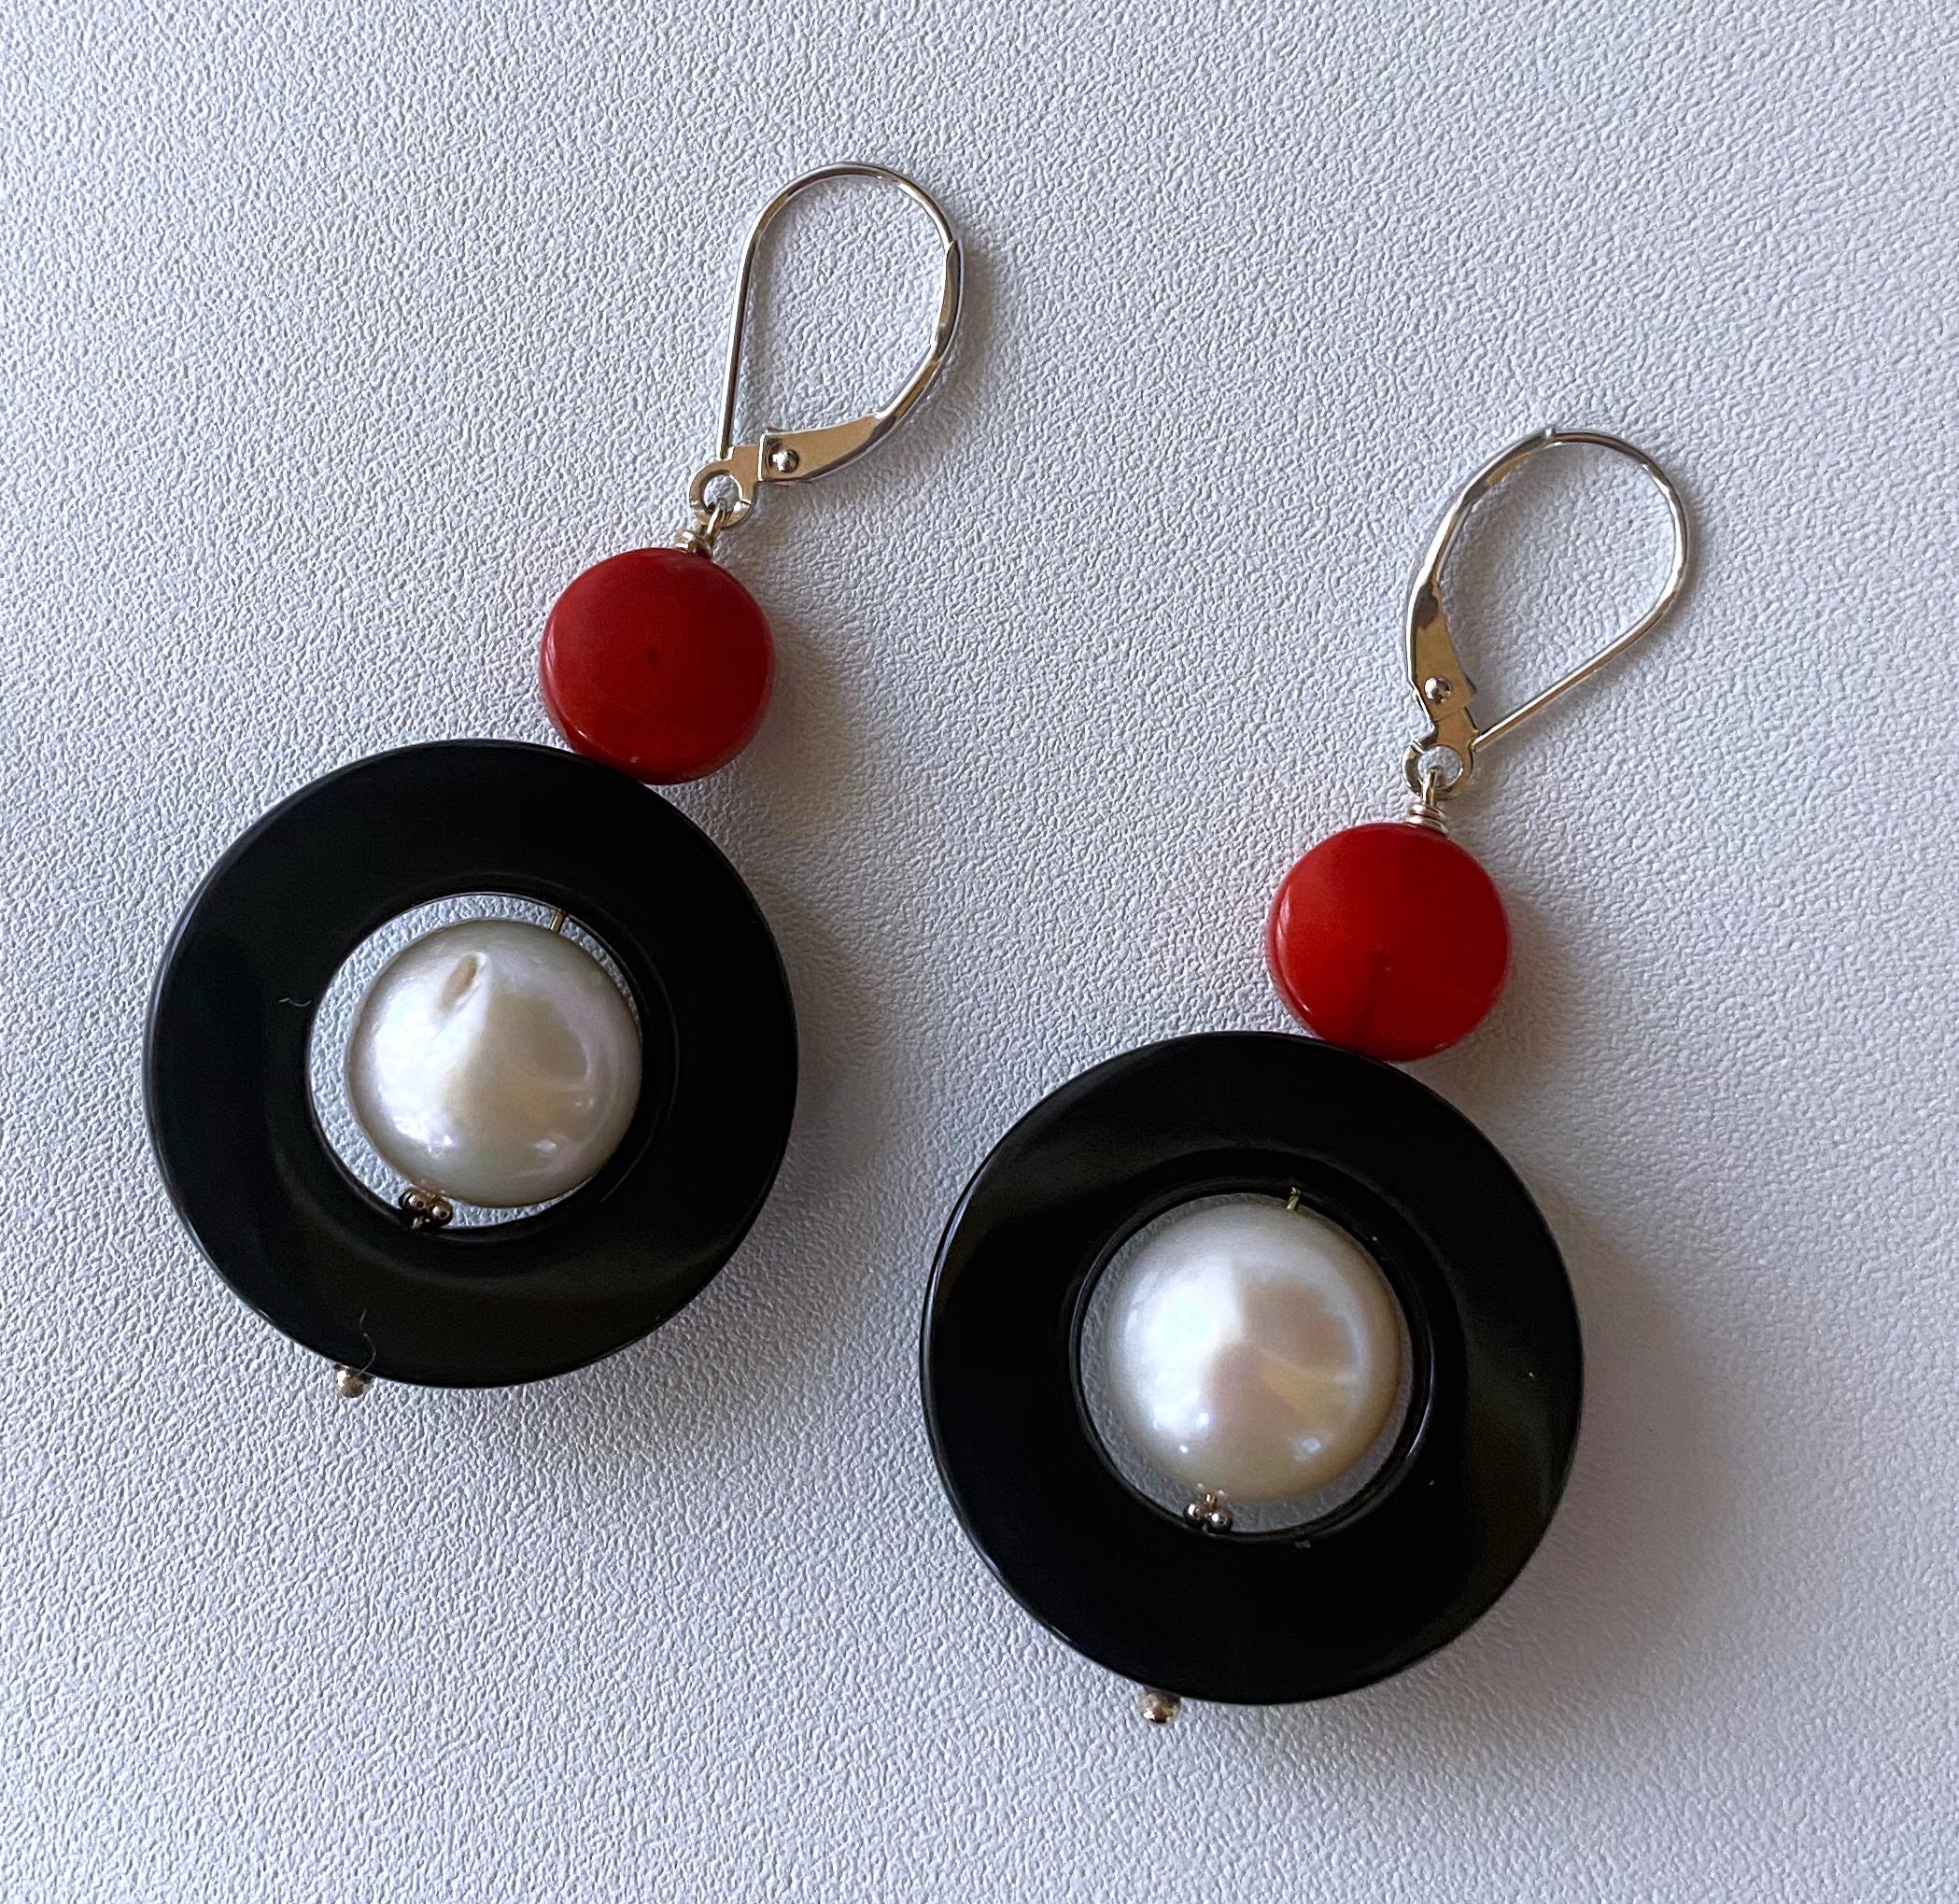 Beautiful pair of Cocktail Earrings by Marina J. These earrings feature a high shine and luster white Pearl with a magnificent iridescence, hanging within a flat Black Onyx Donut Bead. The stark contrast of Black and White is further complimented